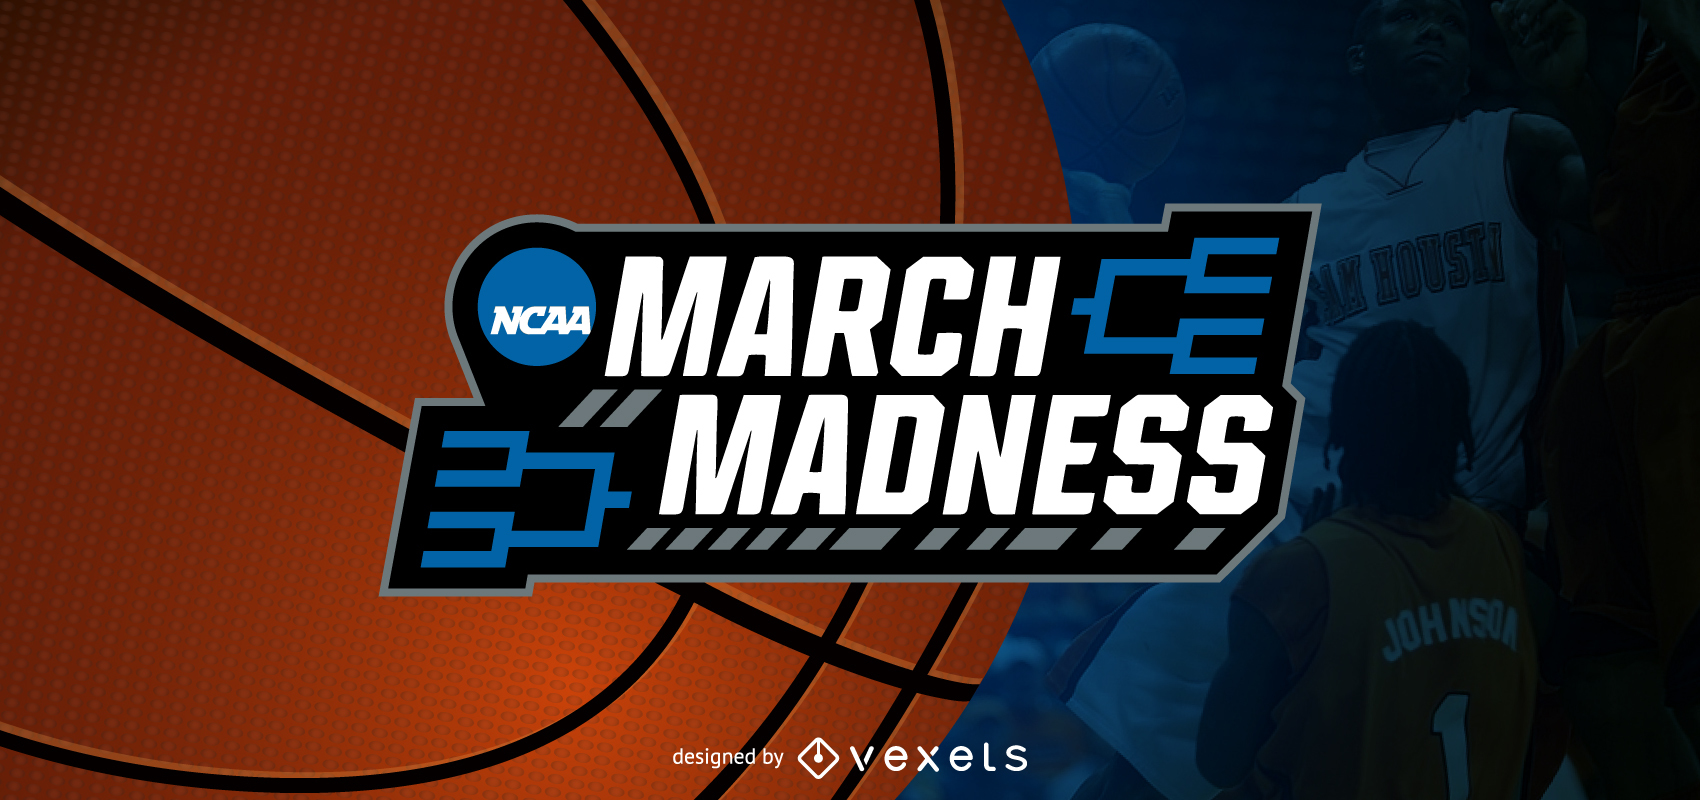 March Madness Vector at Collection of March Madness